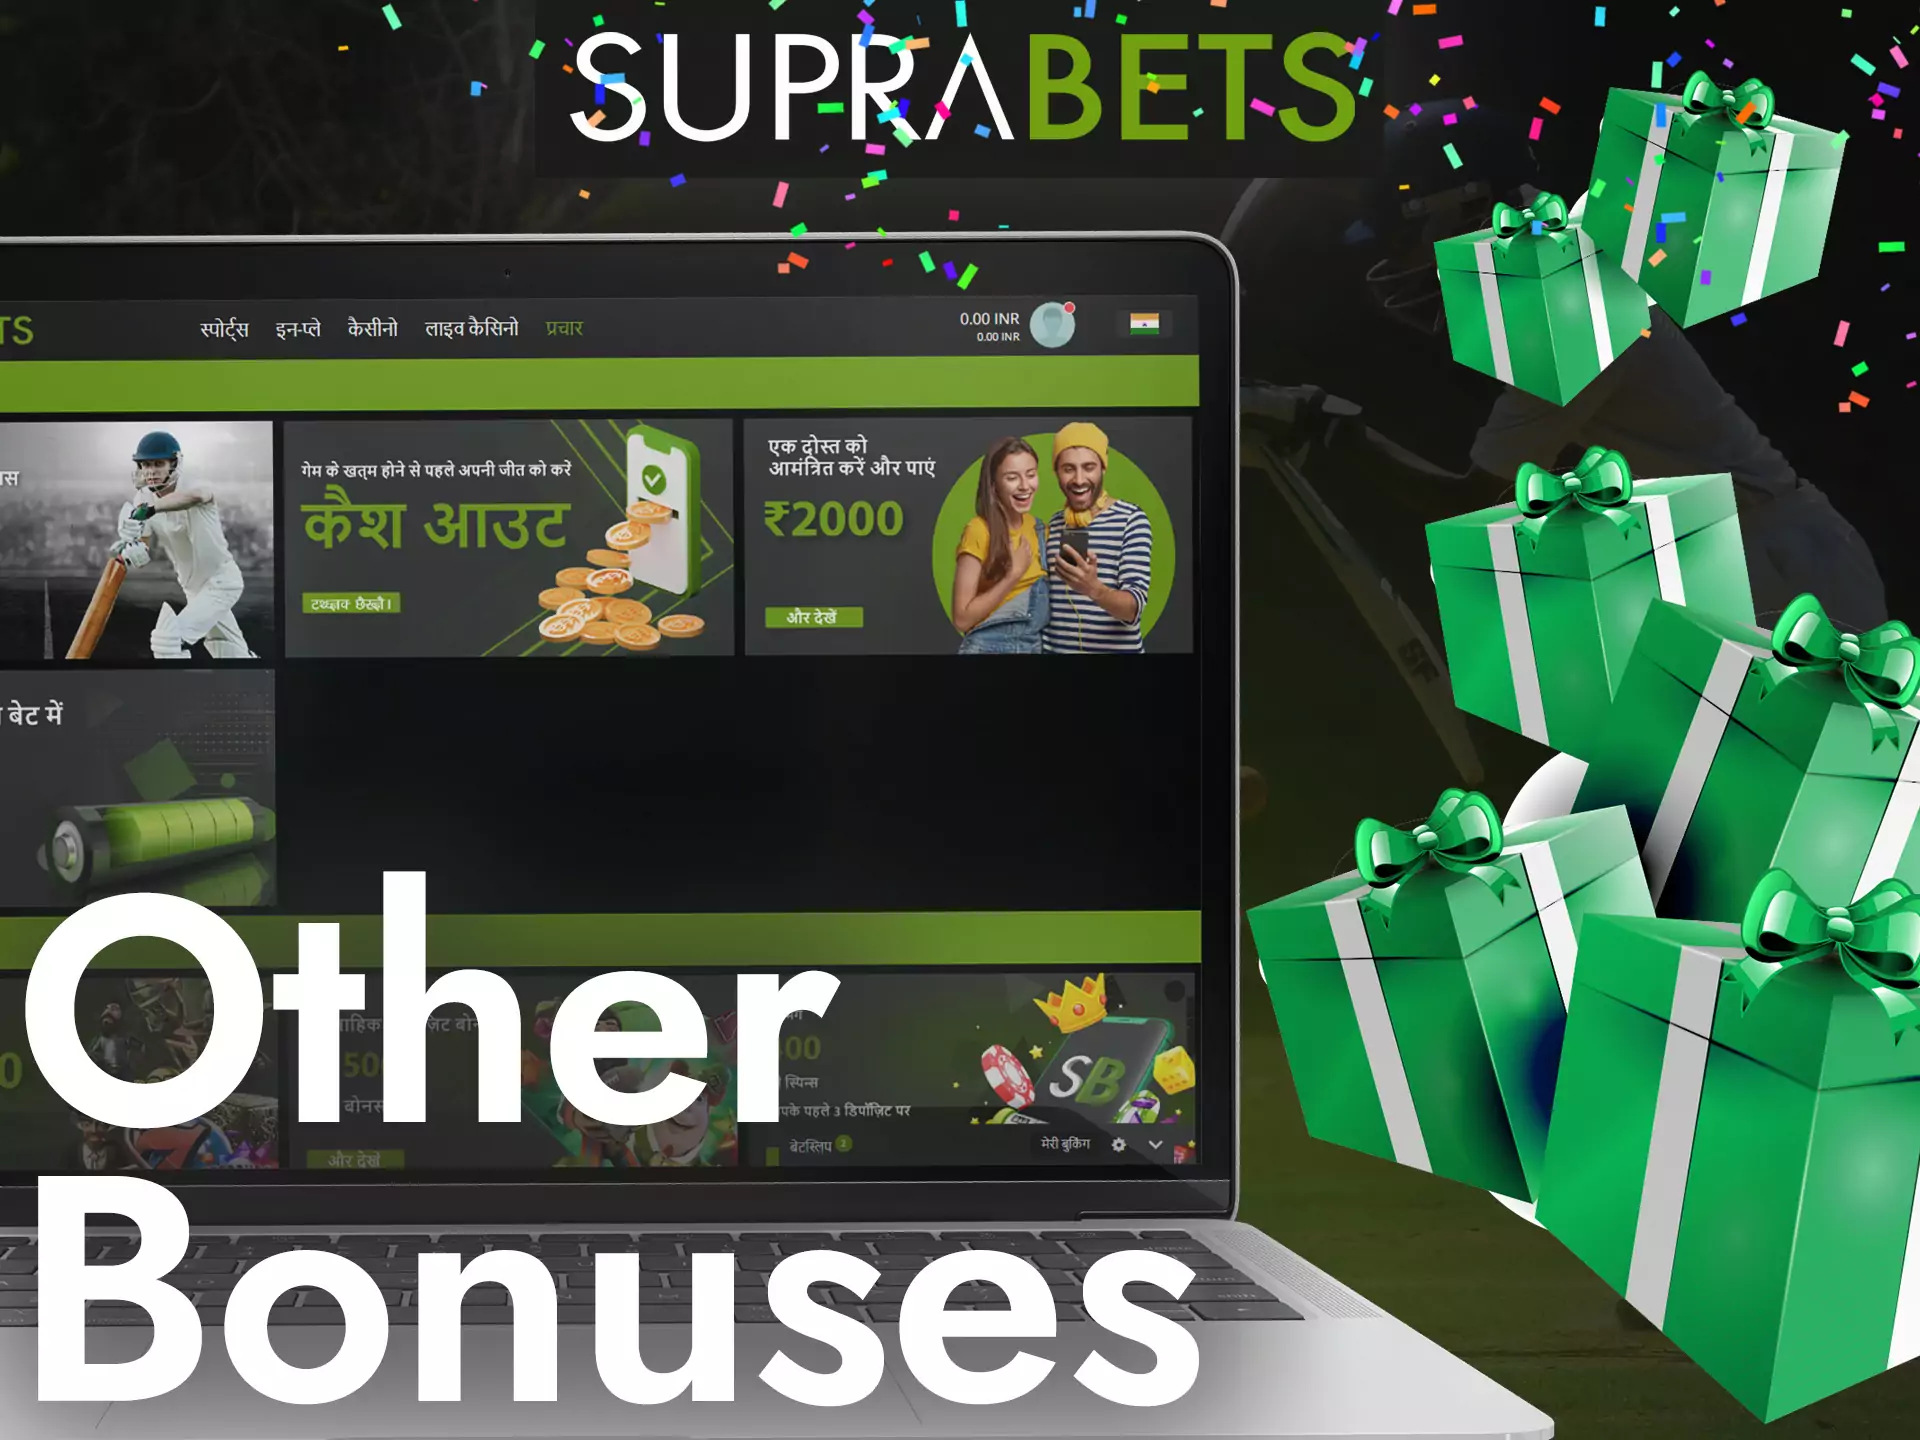 Find out about other Suprabets bonuses for players.